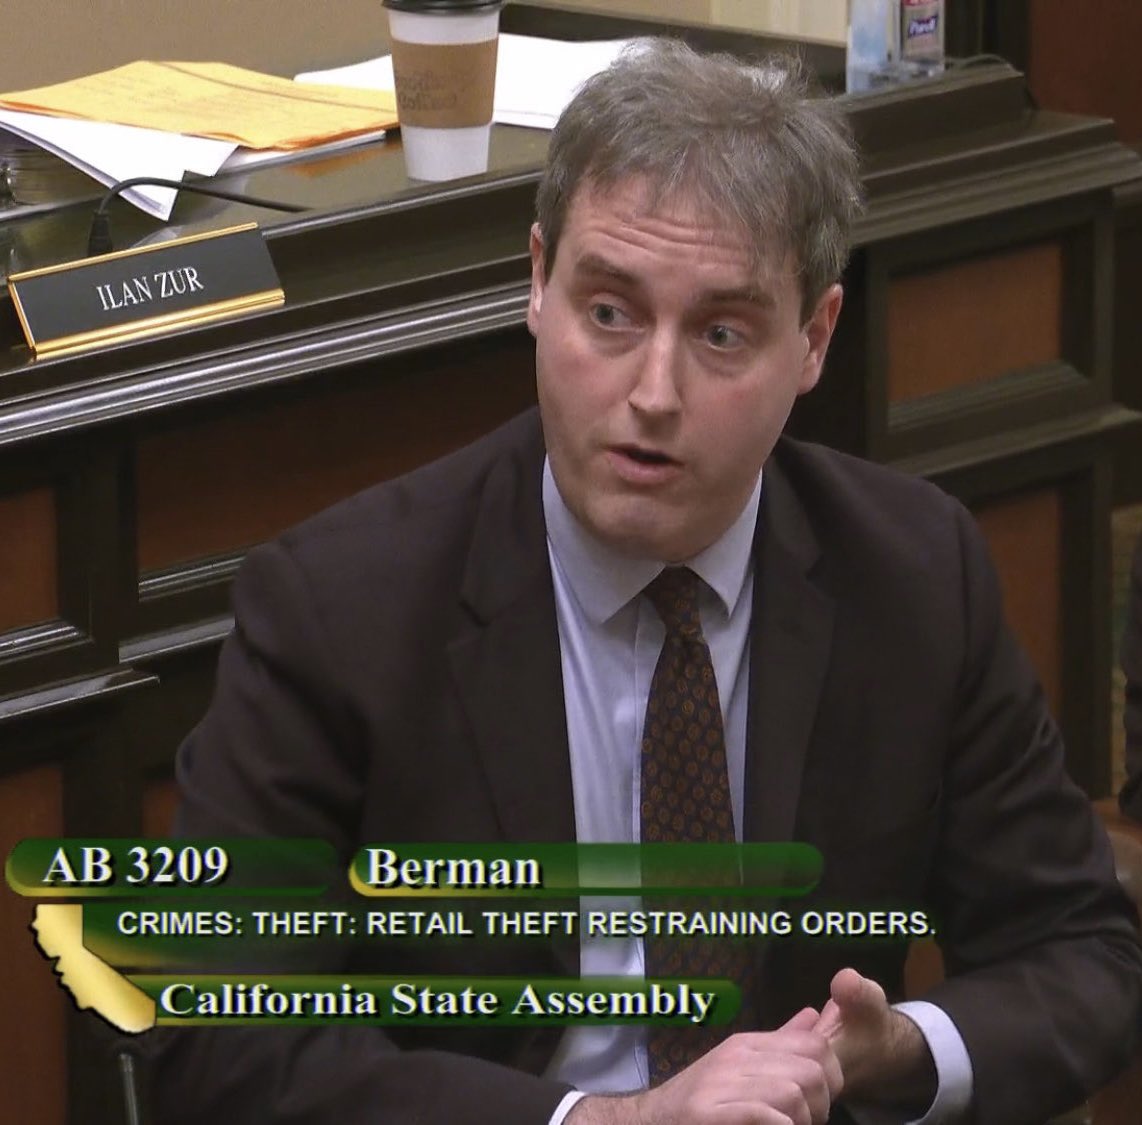 Big thanks to @SFDefender warriors—Deputy Public Defenders Matt Sotorosen and Oliver Kroll —who spoke out today at #CALeg against some terrible bills that would take CA back to a harmful era of mass incarceration. The fight continues. @Defender411